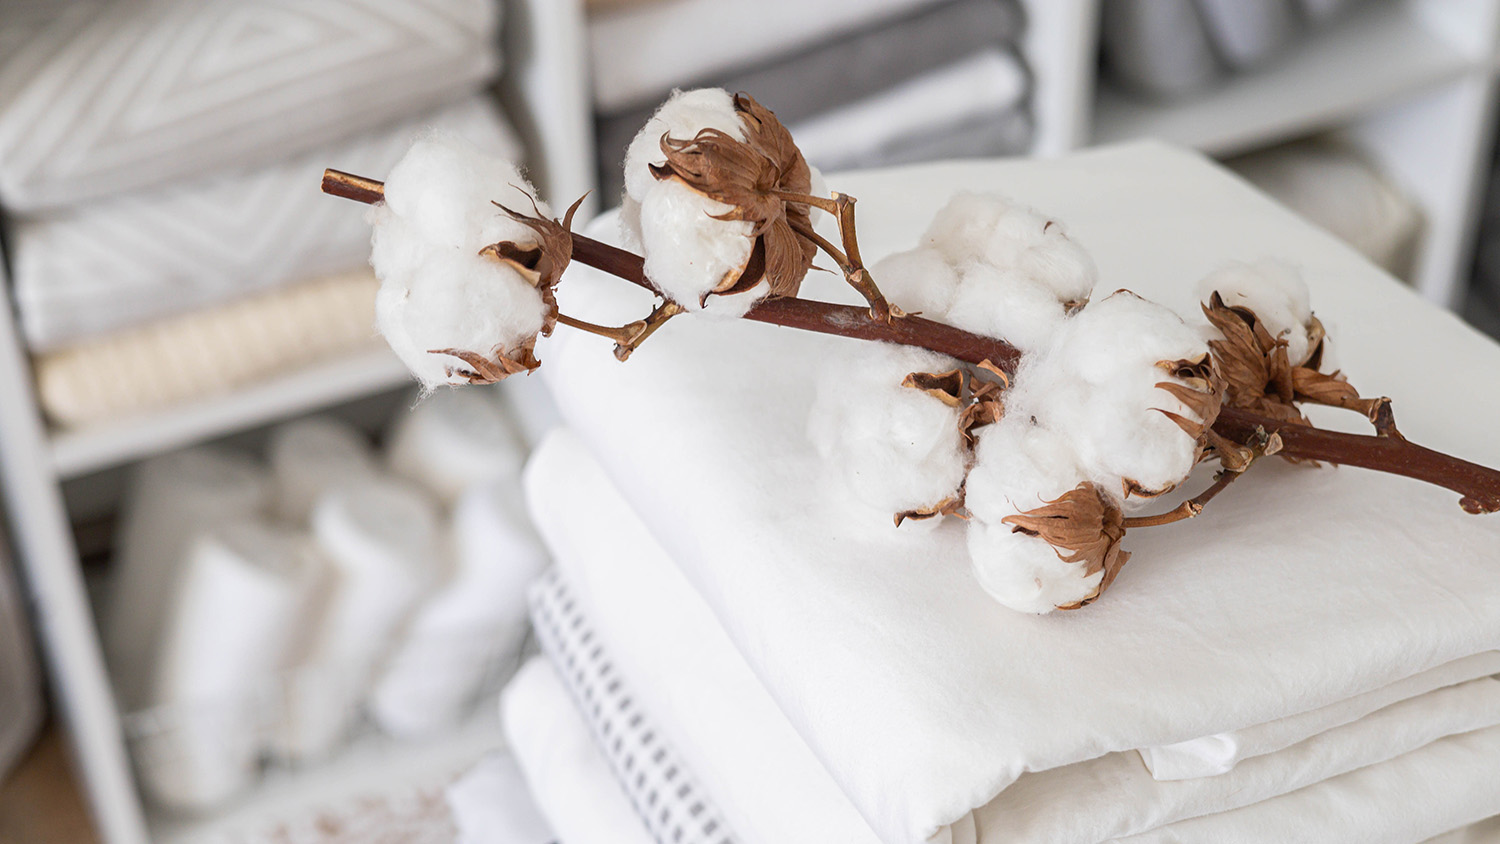 A cotton branch and cotton products. Photo by Kostikova via iStock